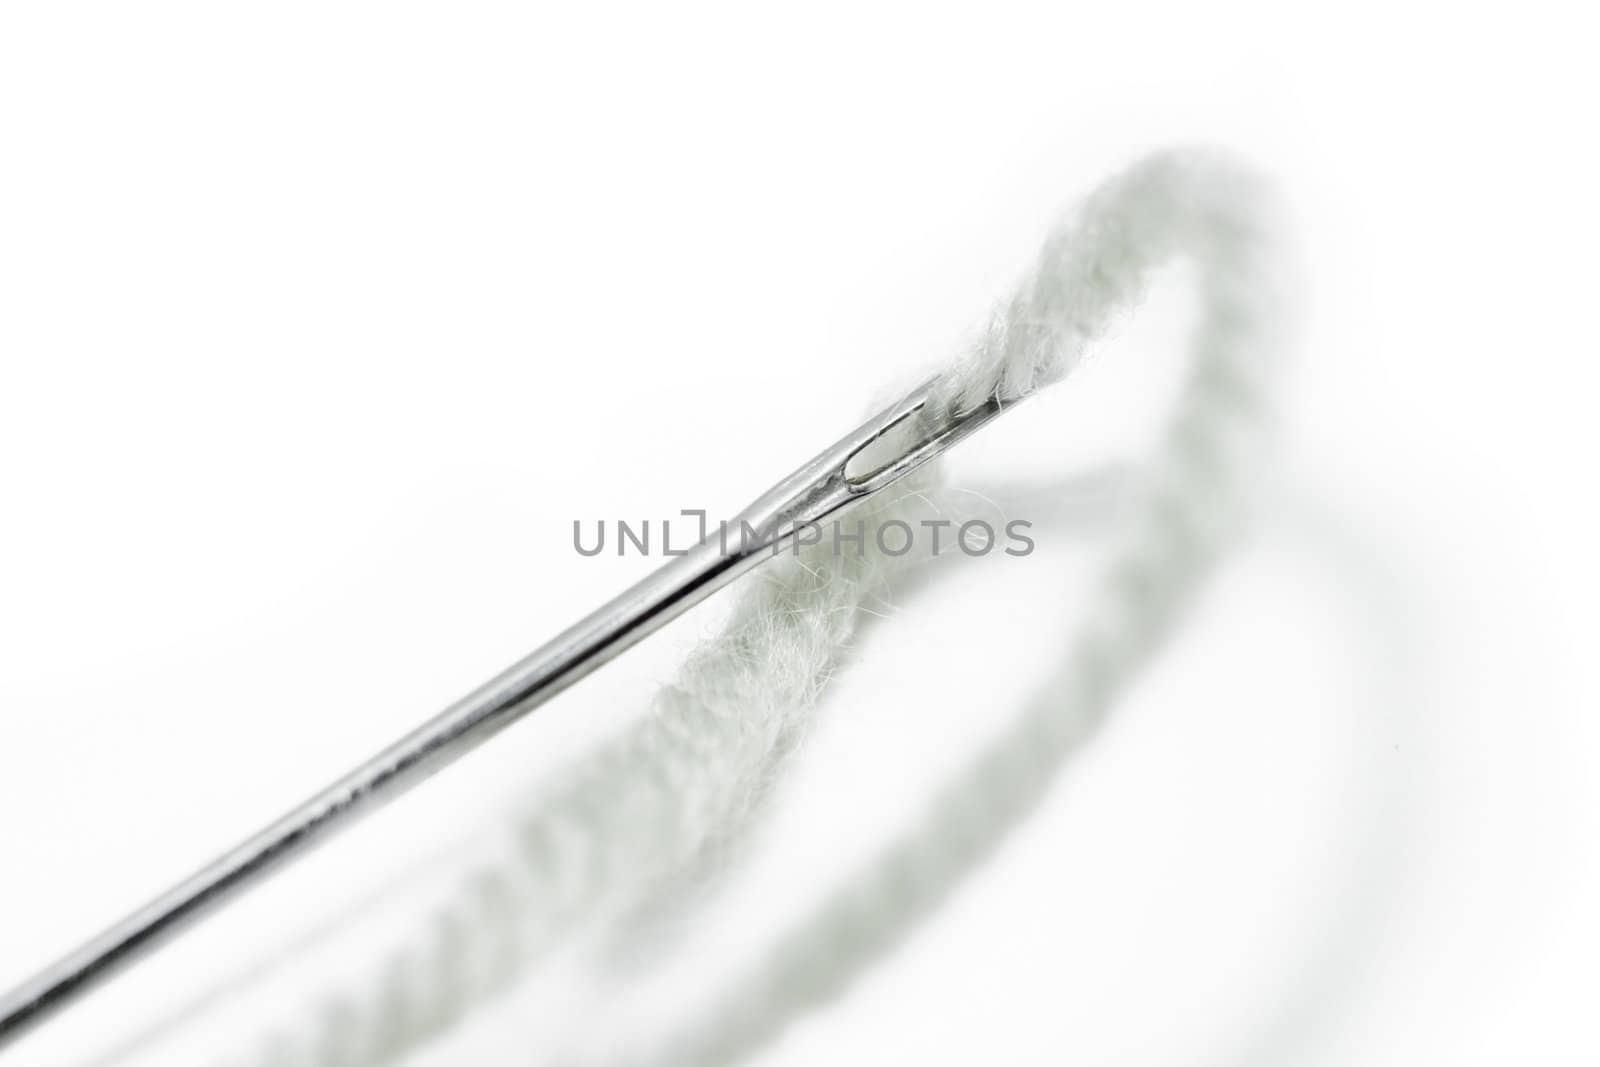 White fluffy thread is inserted into a large, sharp and shiny steel needle. Isolated on white background